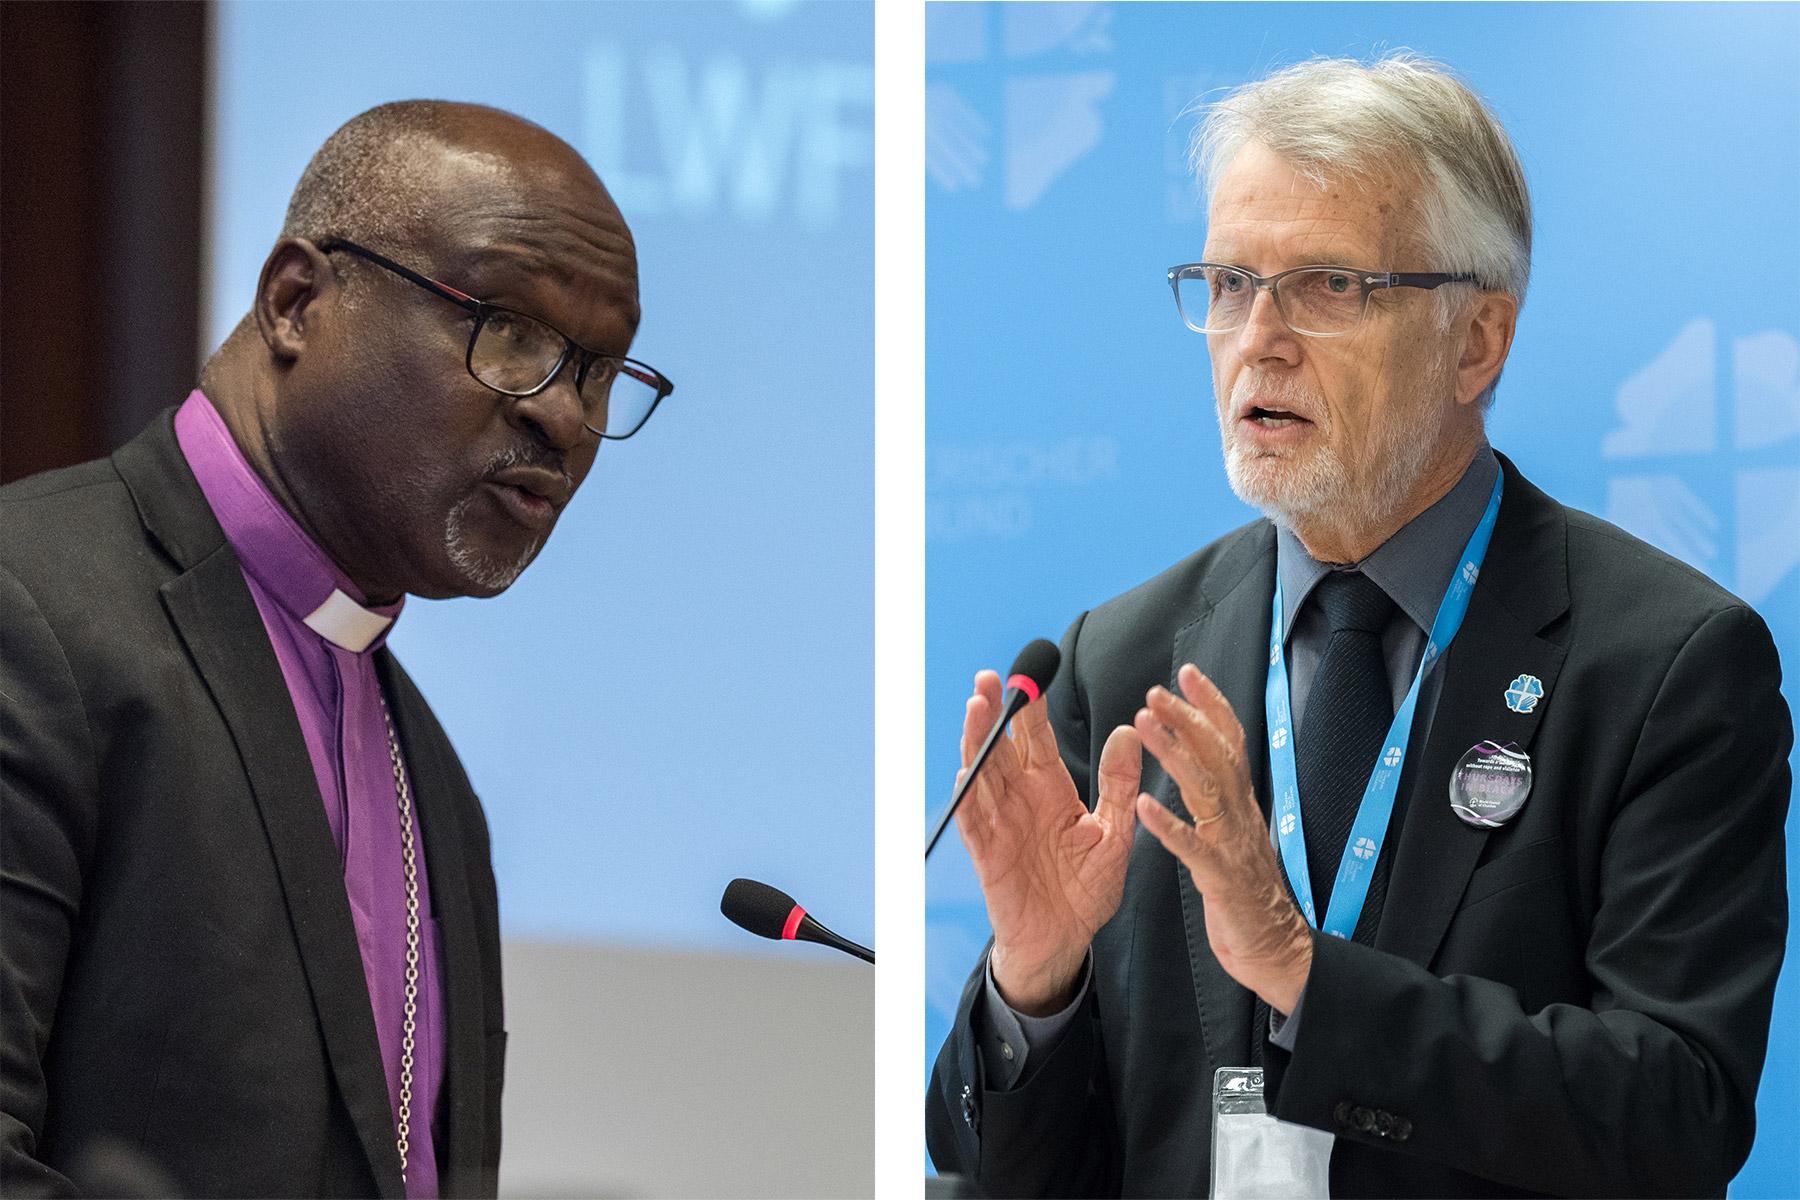 Composite photo. LWF President Musa and General Secretary Junge call churches to confront injustice and inequalities in times of pandemic. Photos: LWF/Albin Hillert 